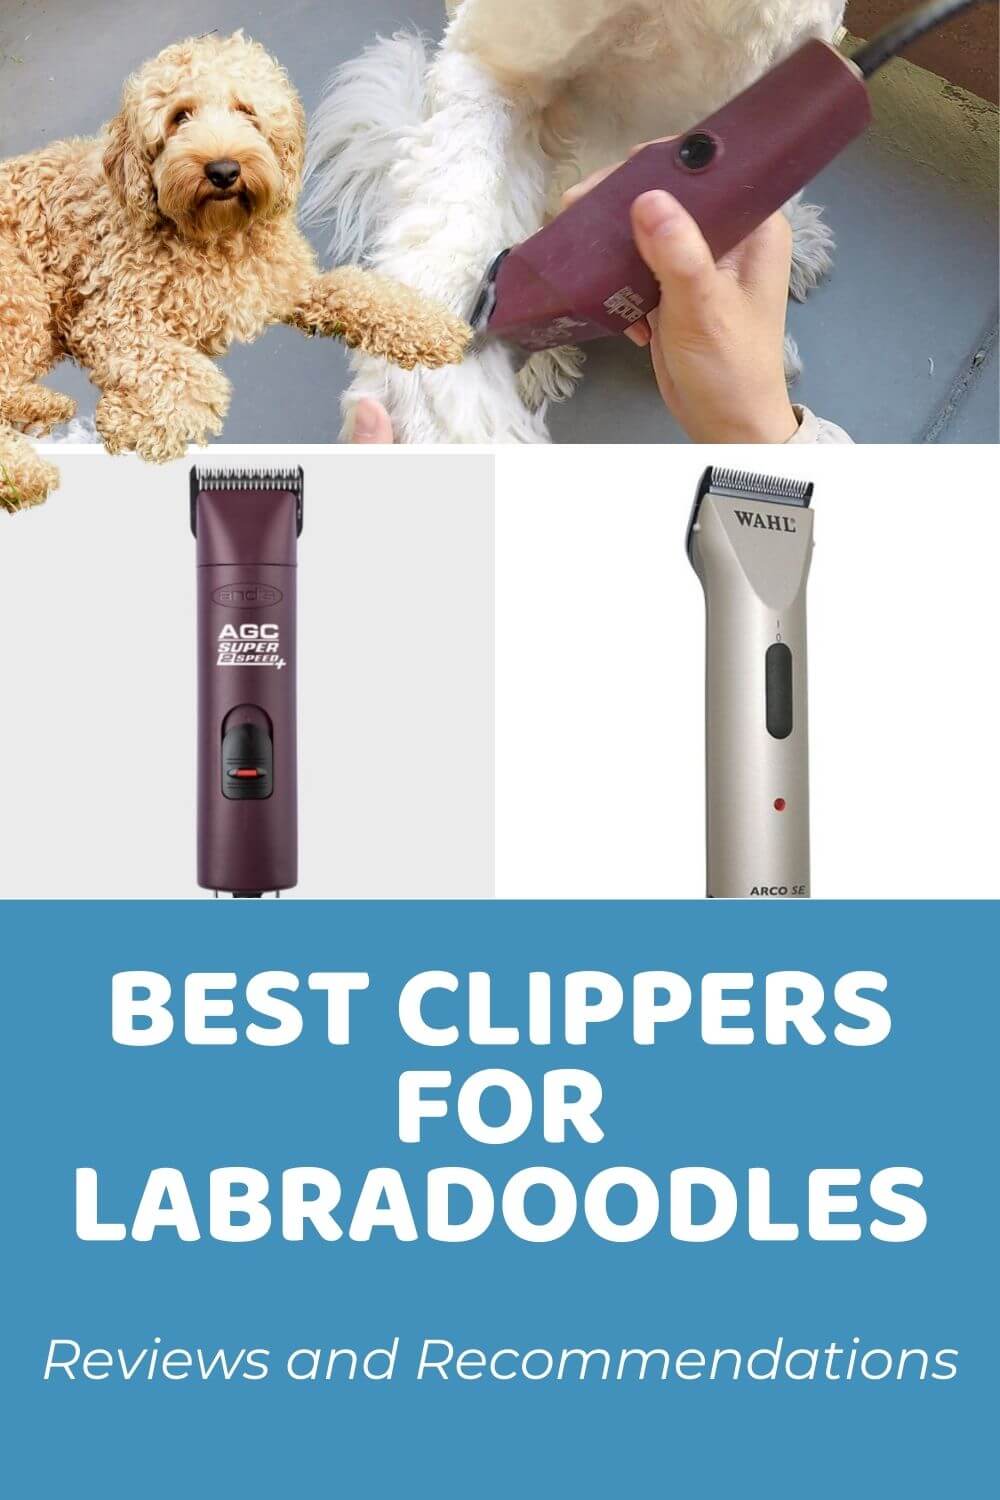 Best Clippers For Thick Hair: Top Picks For Dogs With Thick Coats - Doodle  Doods